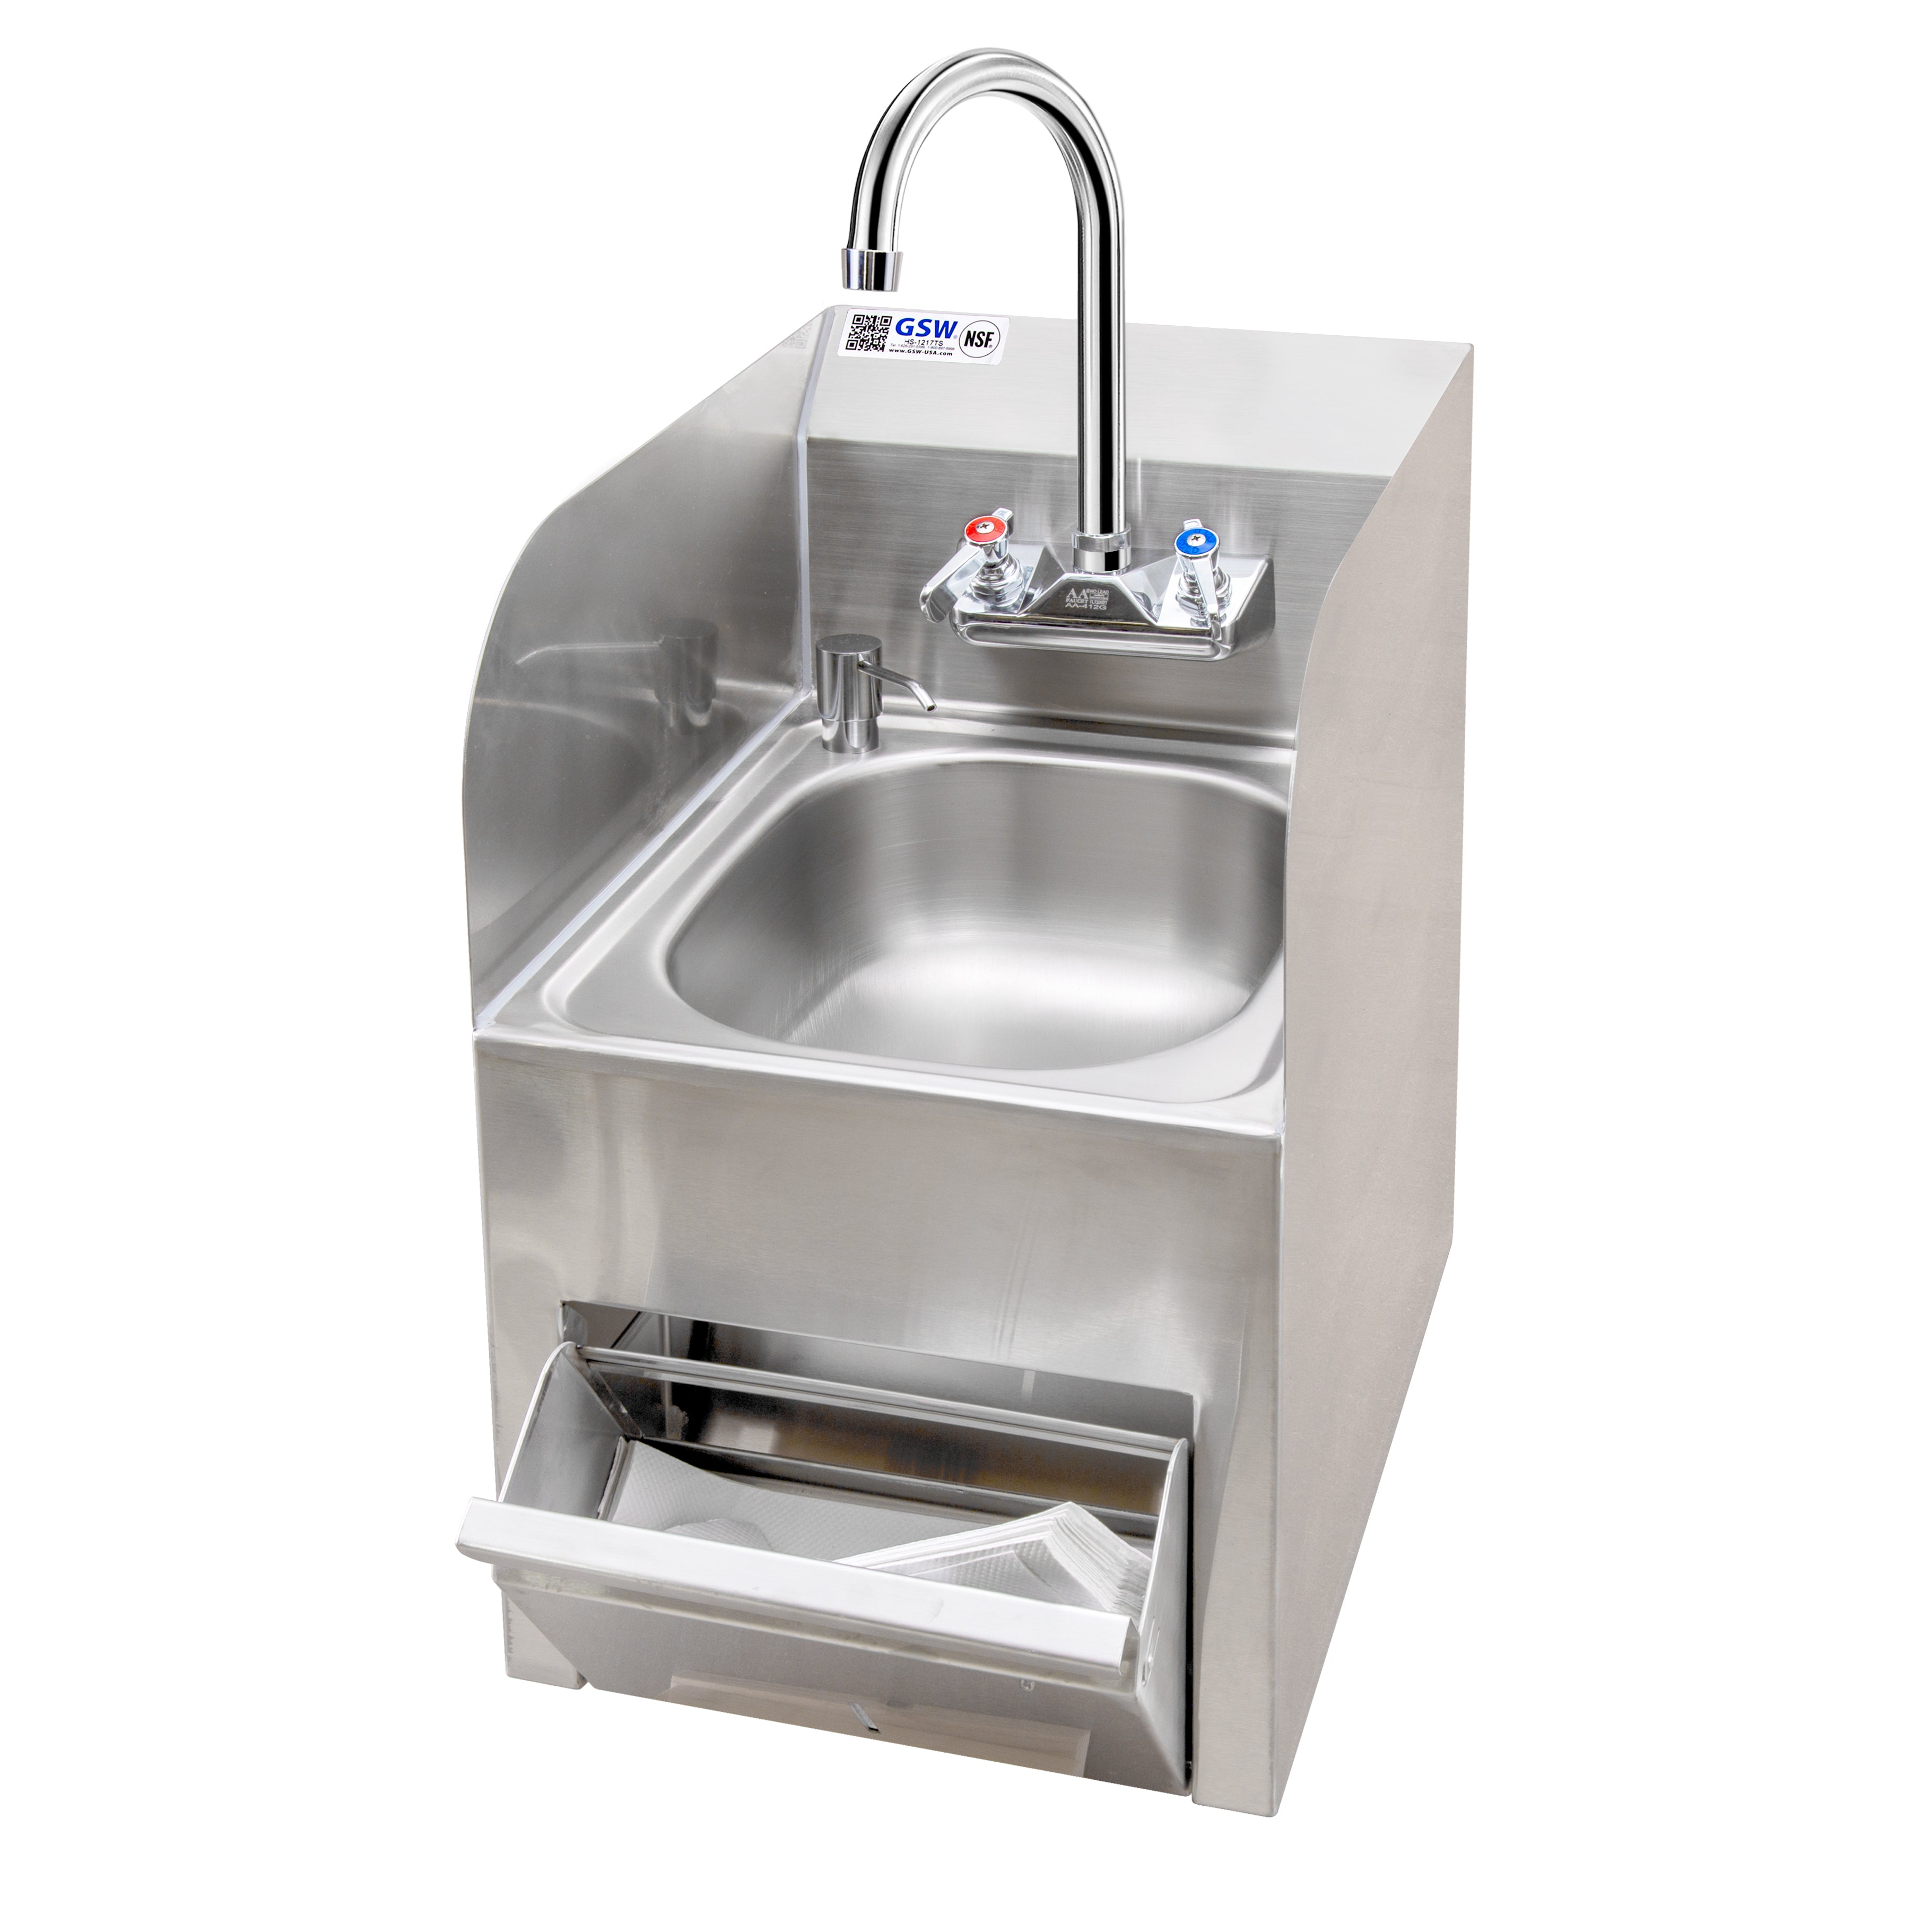 Splash Guard Hand Sink with Towel and Soap Dispenser, HS-1217TS